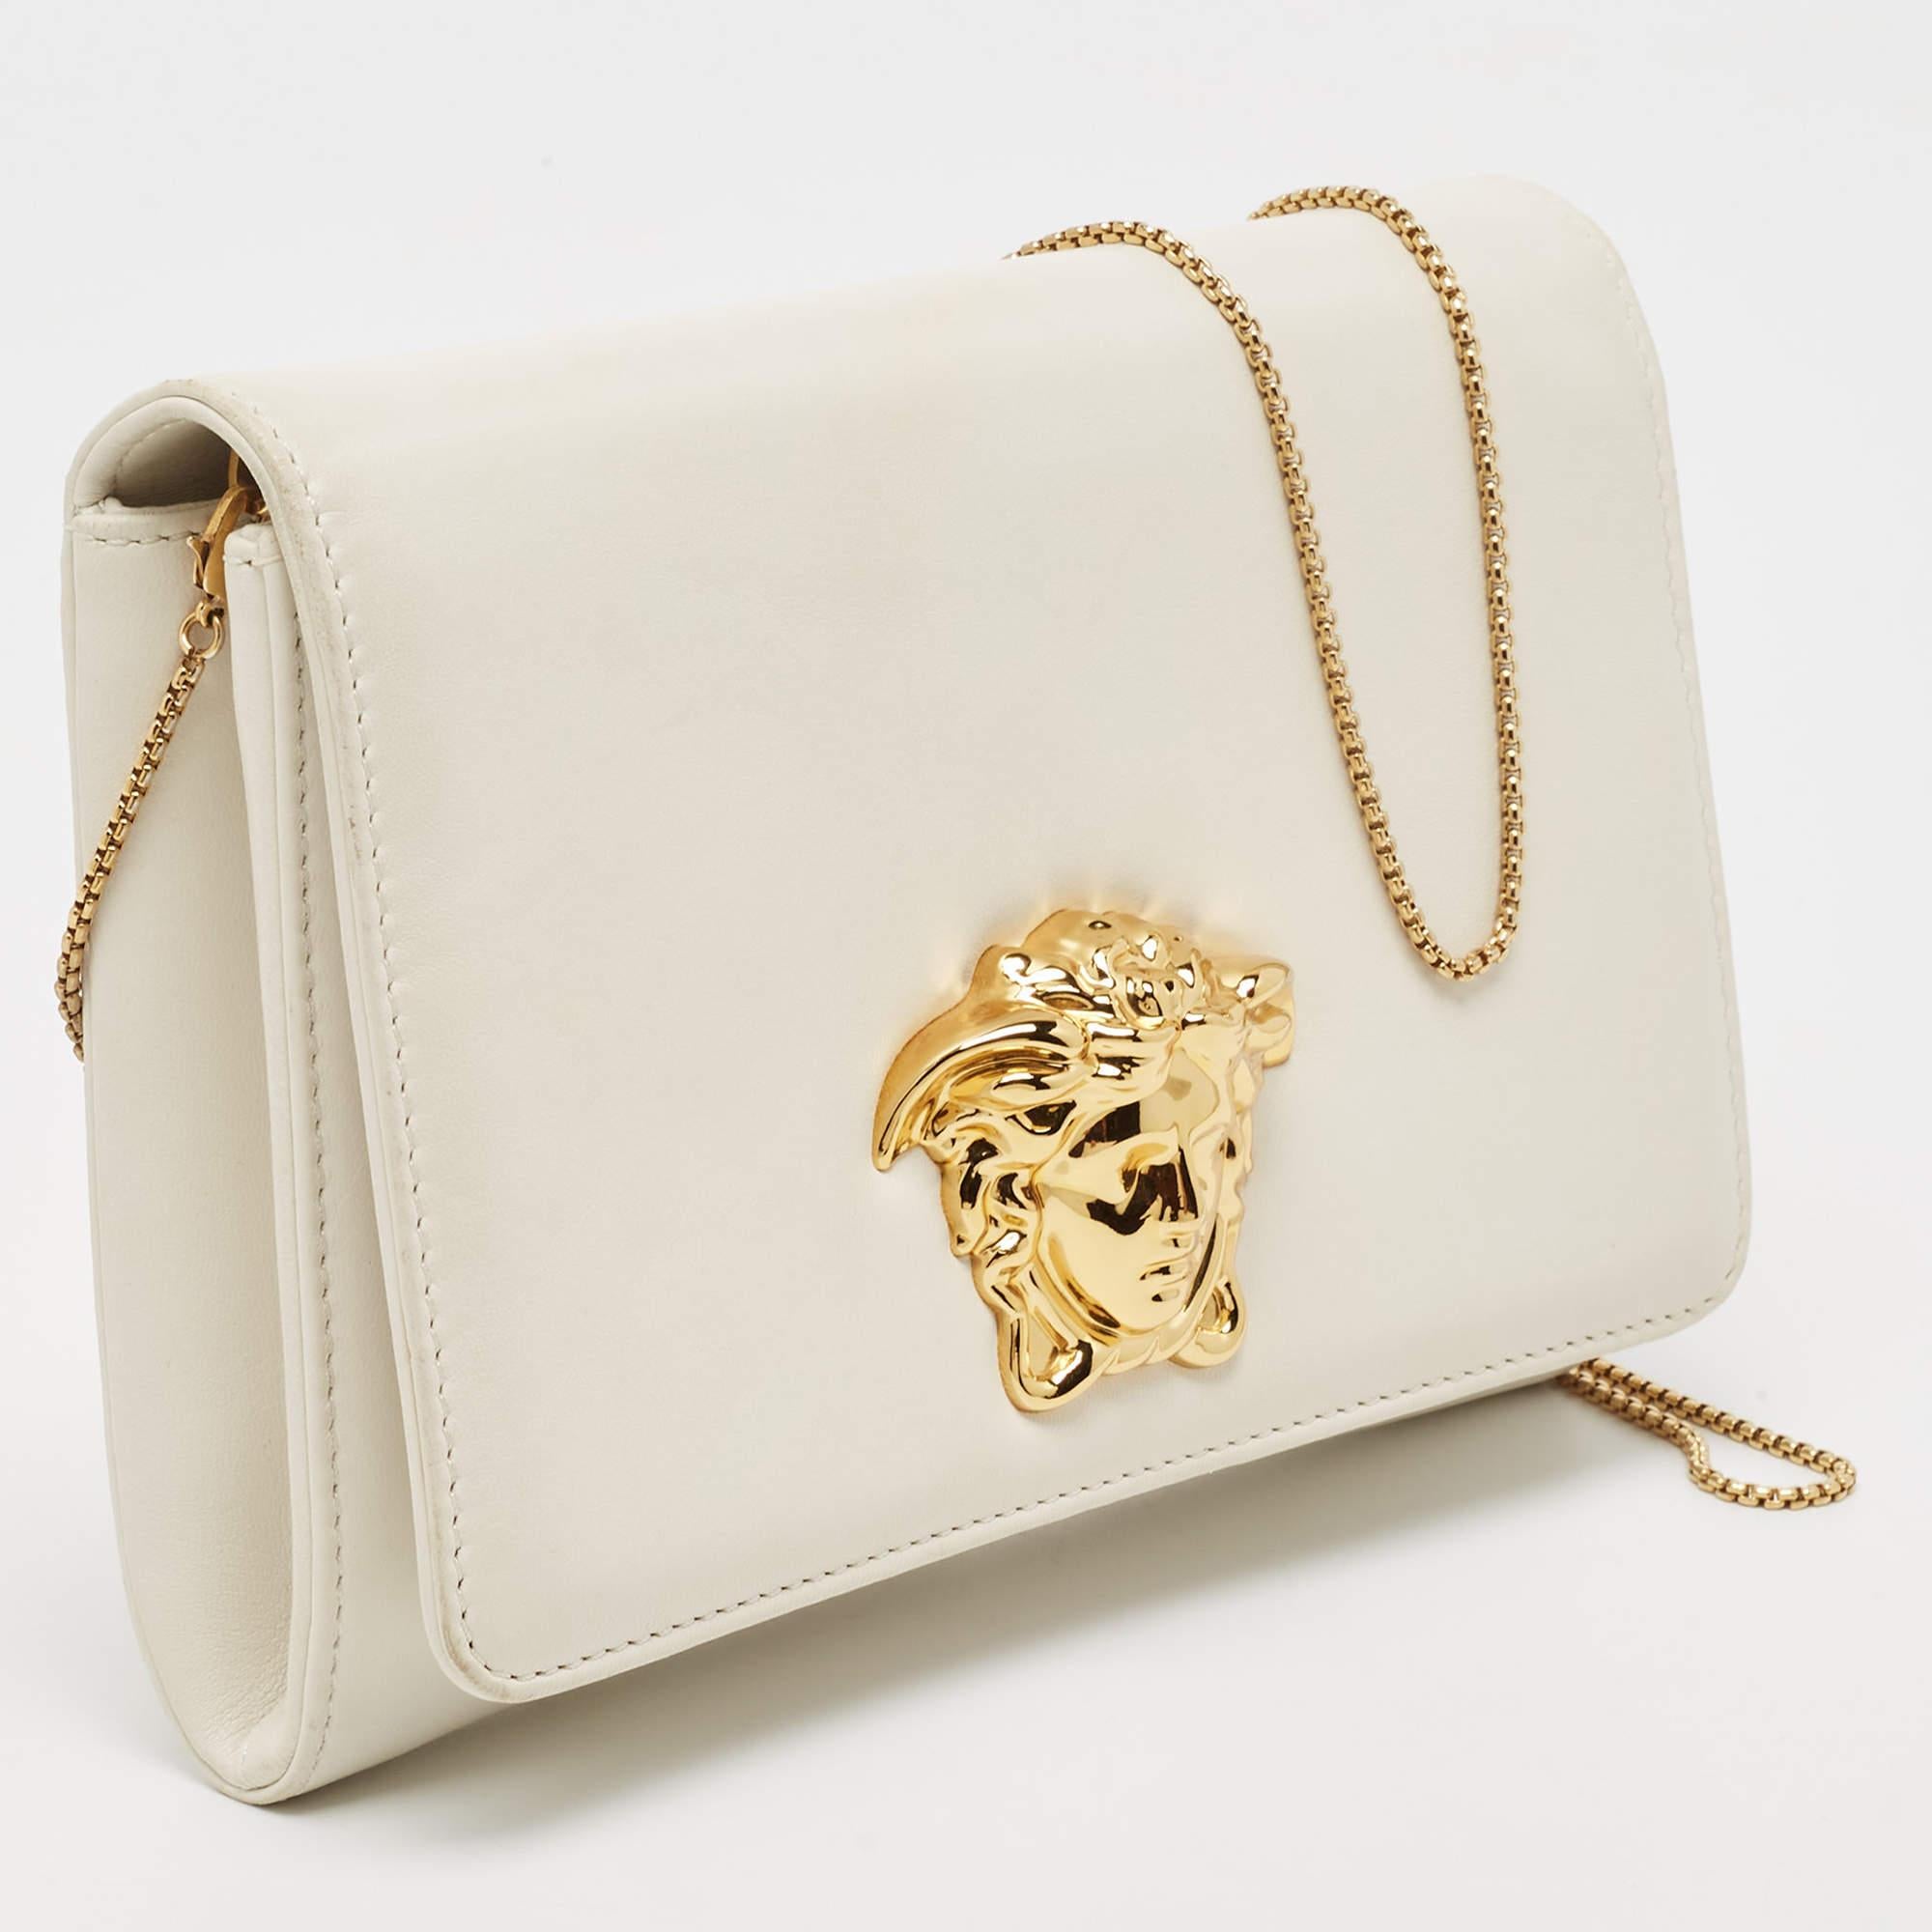 Women's Versace Off White Leather Medusa Chain Clutch